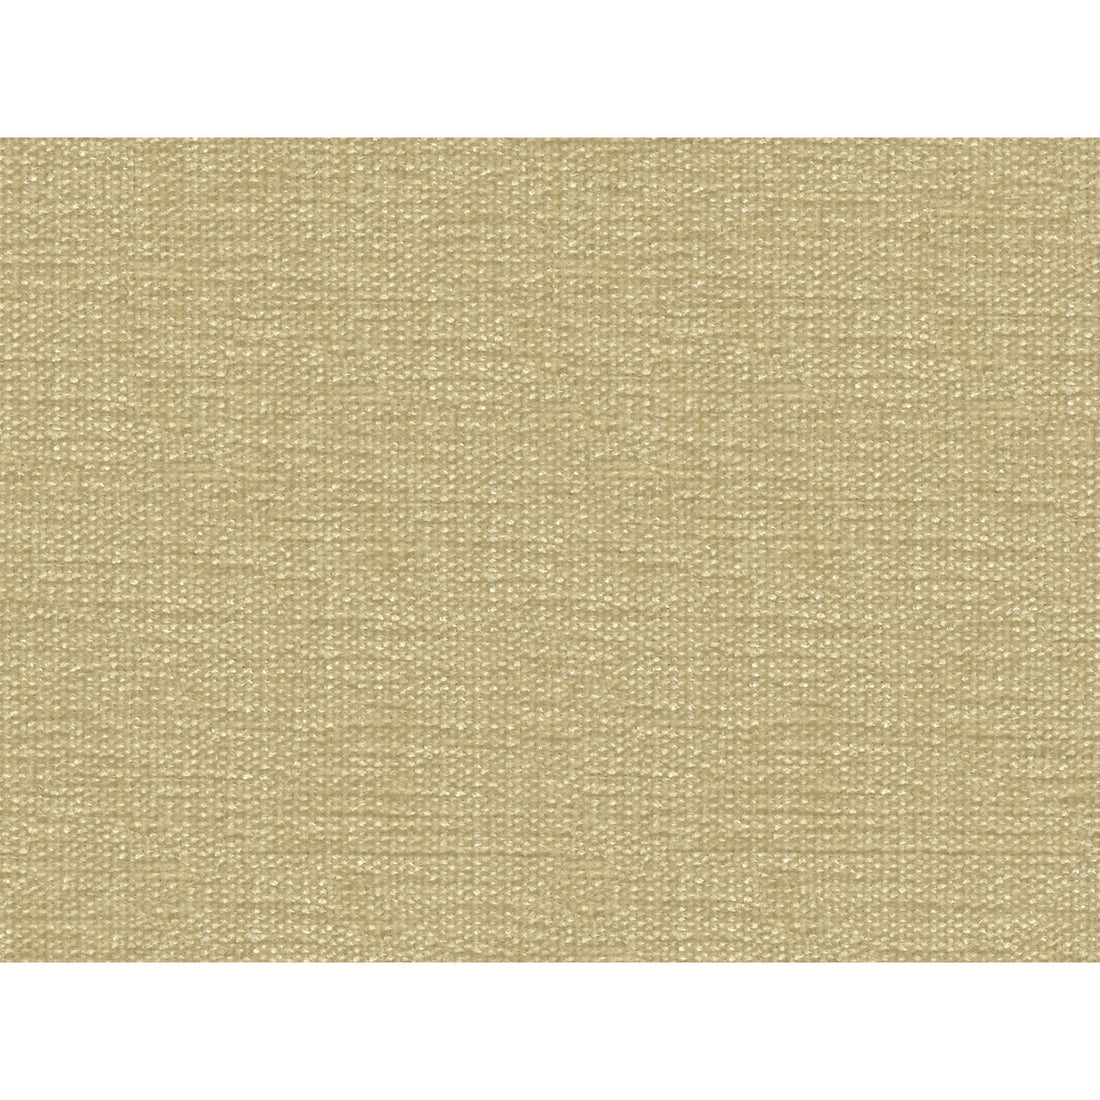 Kravet Contract fabric in 34961-1 color - pattern 34961.1.0 - by Kravet Contract in the Kravetarmor collection